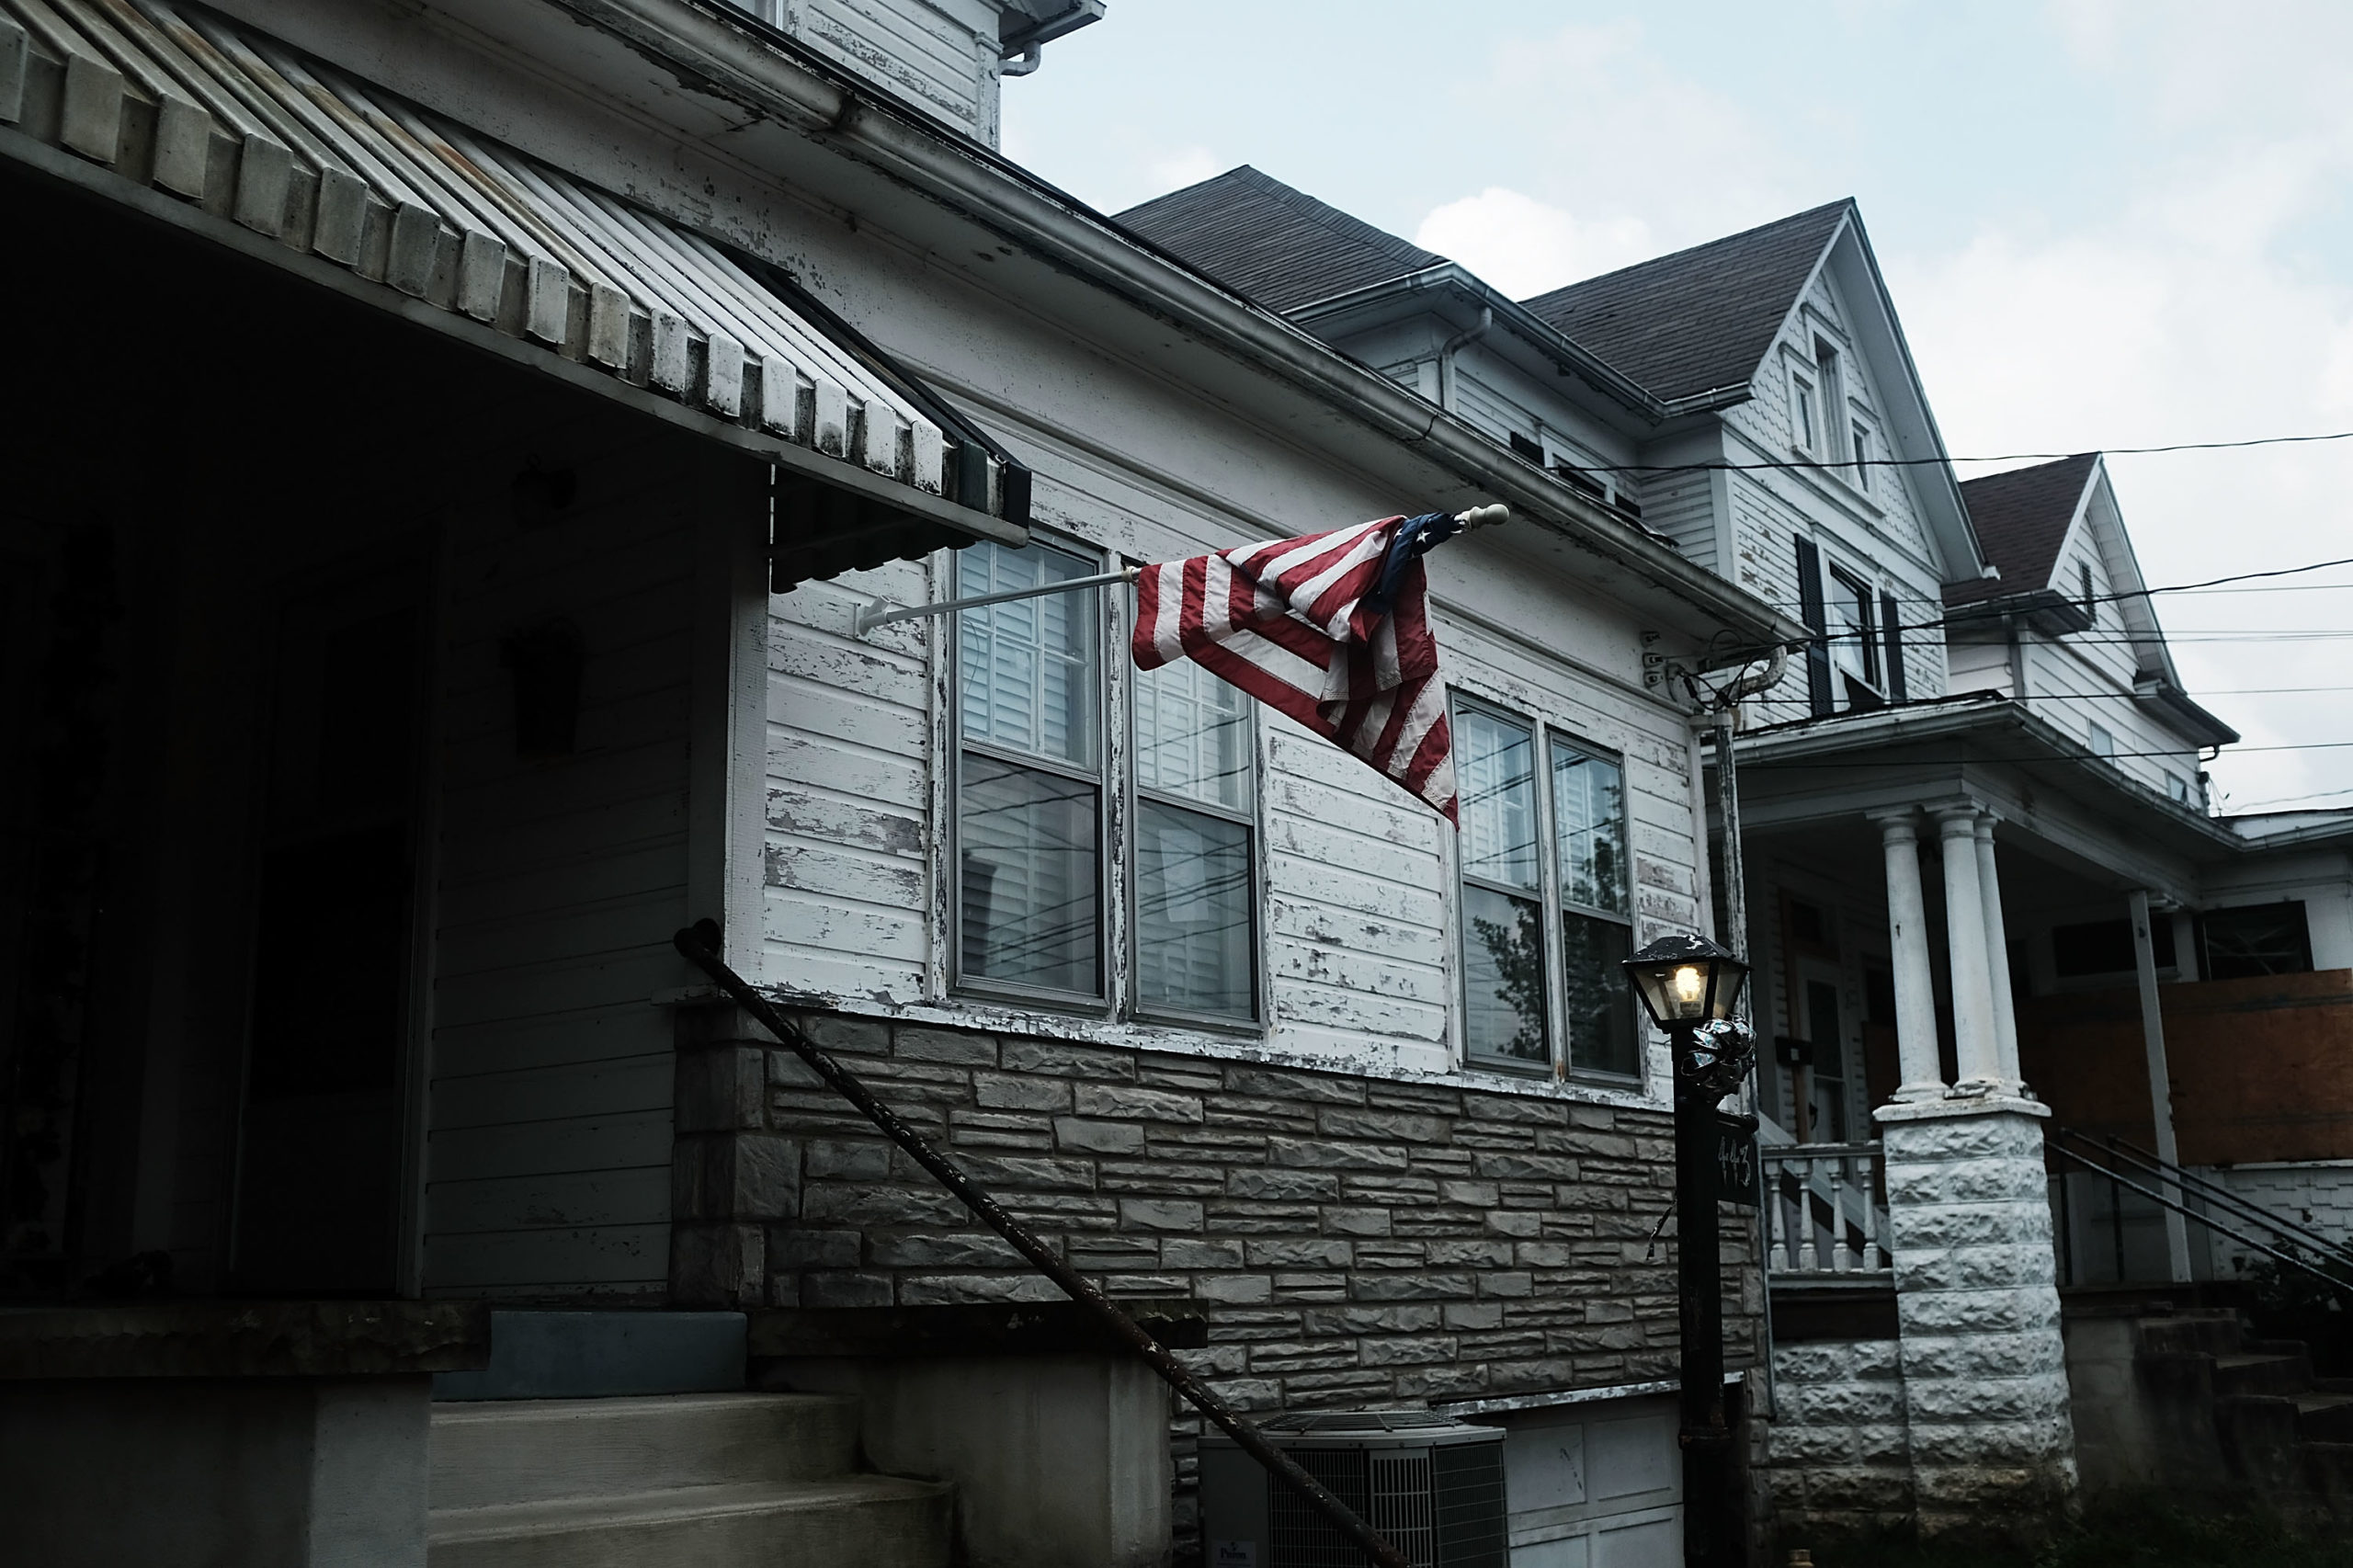 An American flag hangs in Clarksburg, West Virginia. The state, one of the poorest in the nation, had disproportionately benefited from the expanded credit. (Spencer Platt/Getty Images)